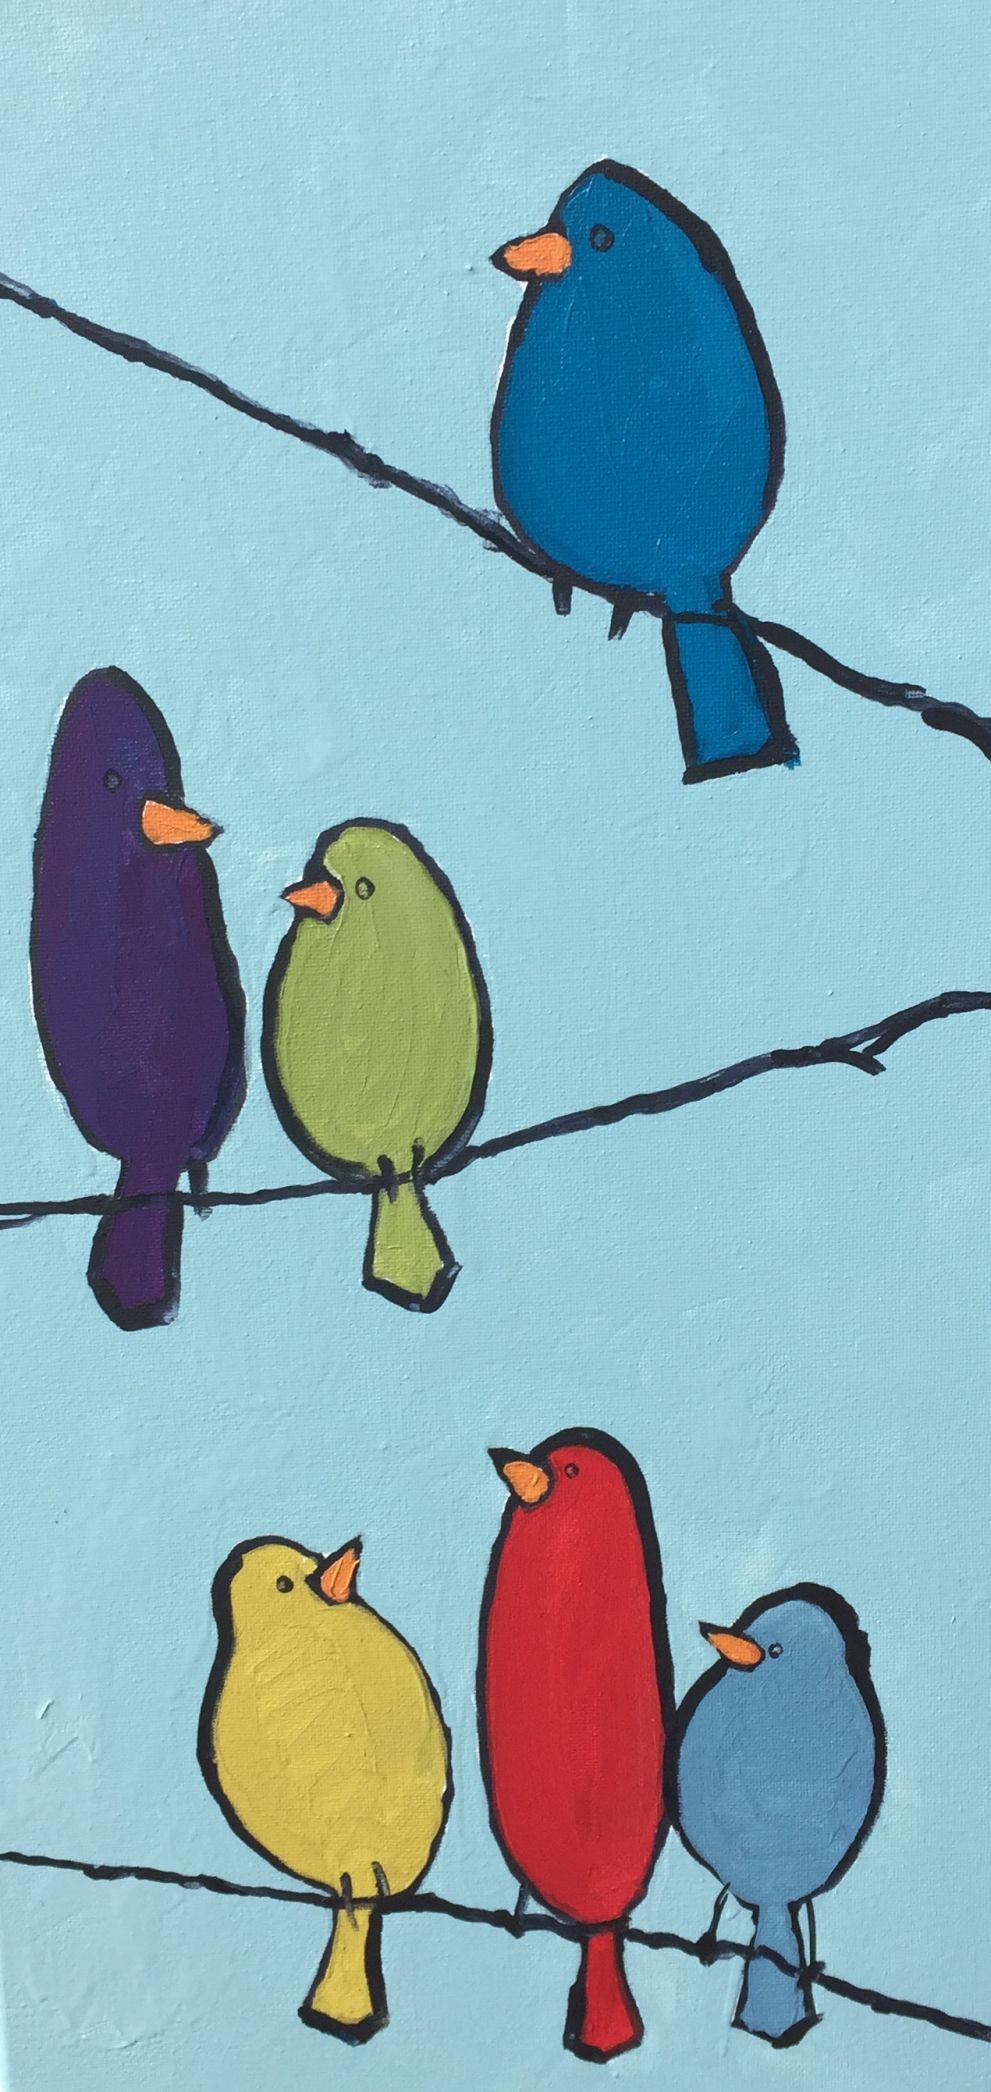 Artist's whimsical bird paintings make for unique exhibit | Latest ...